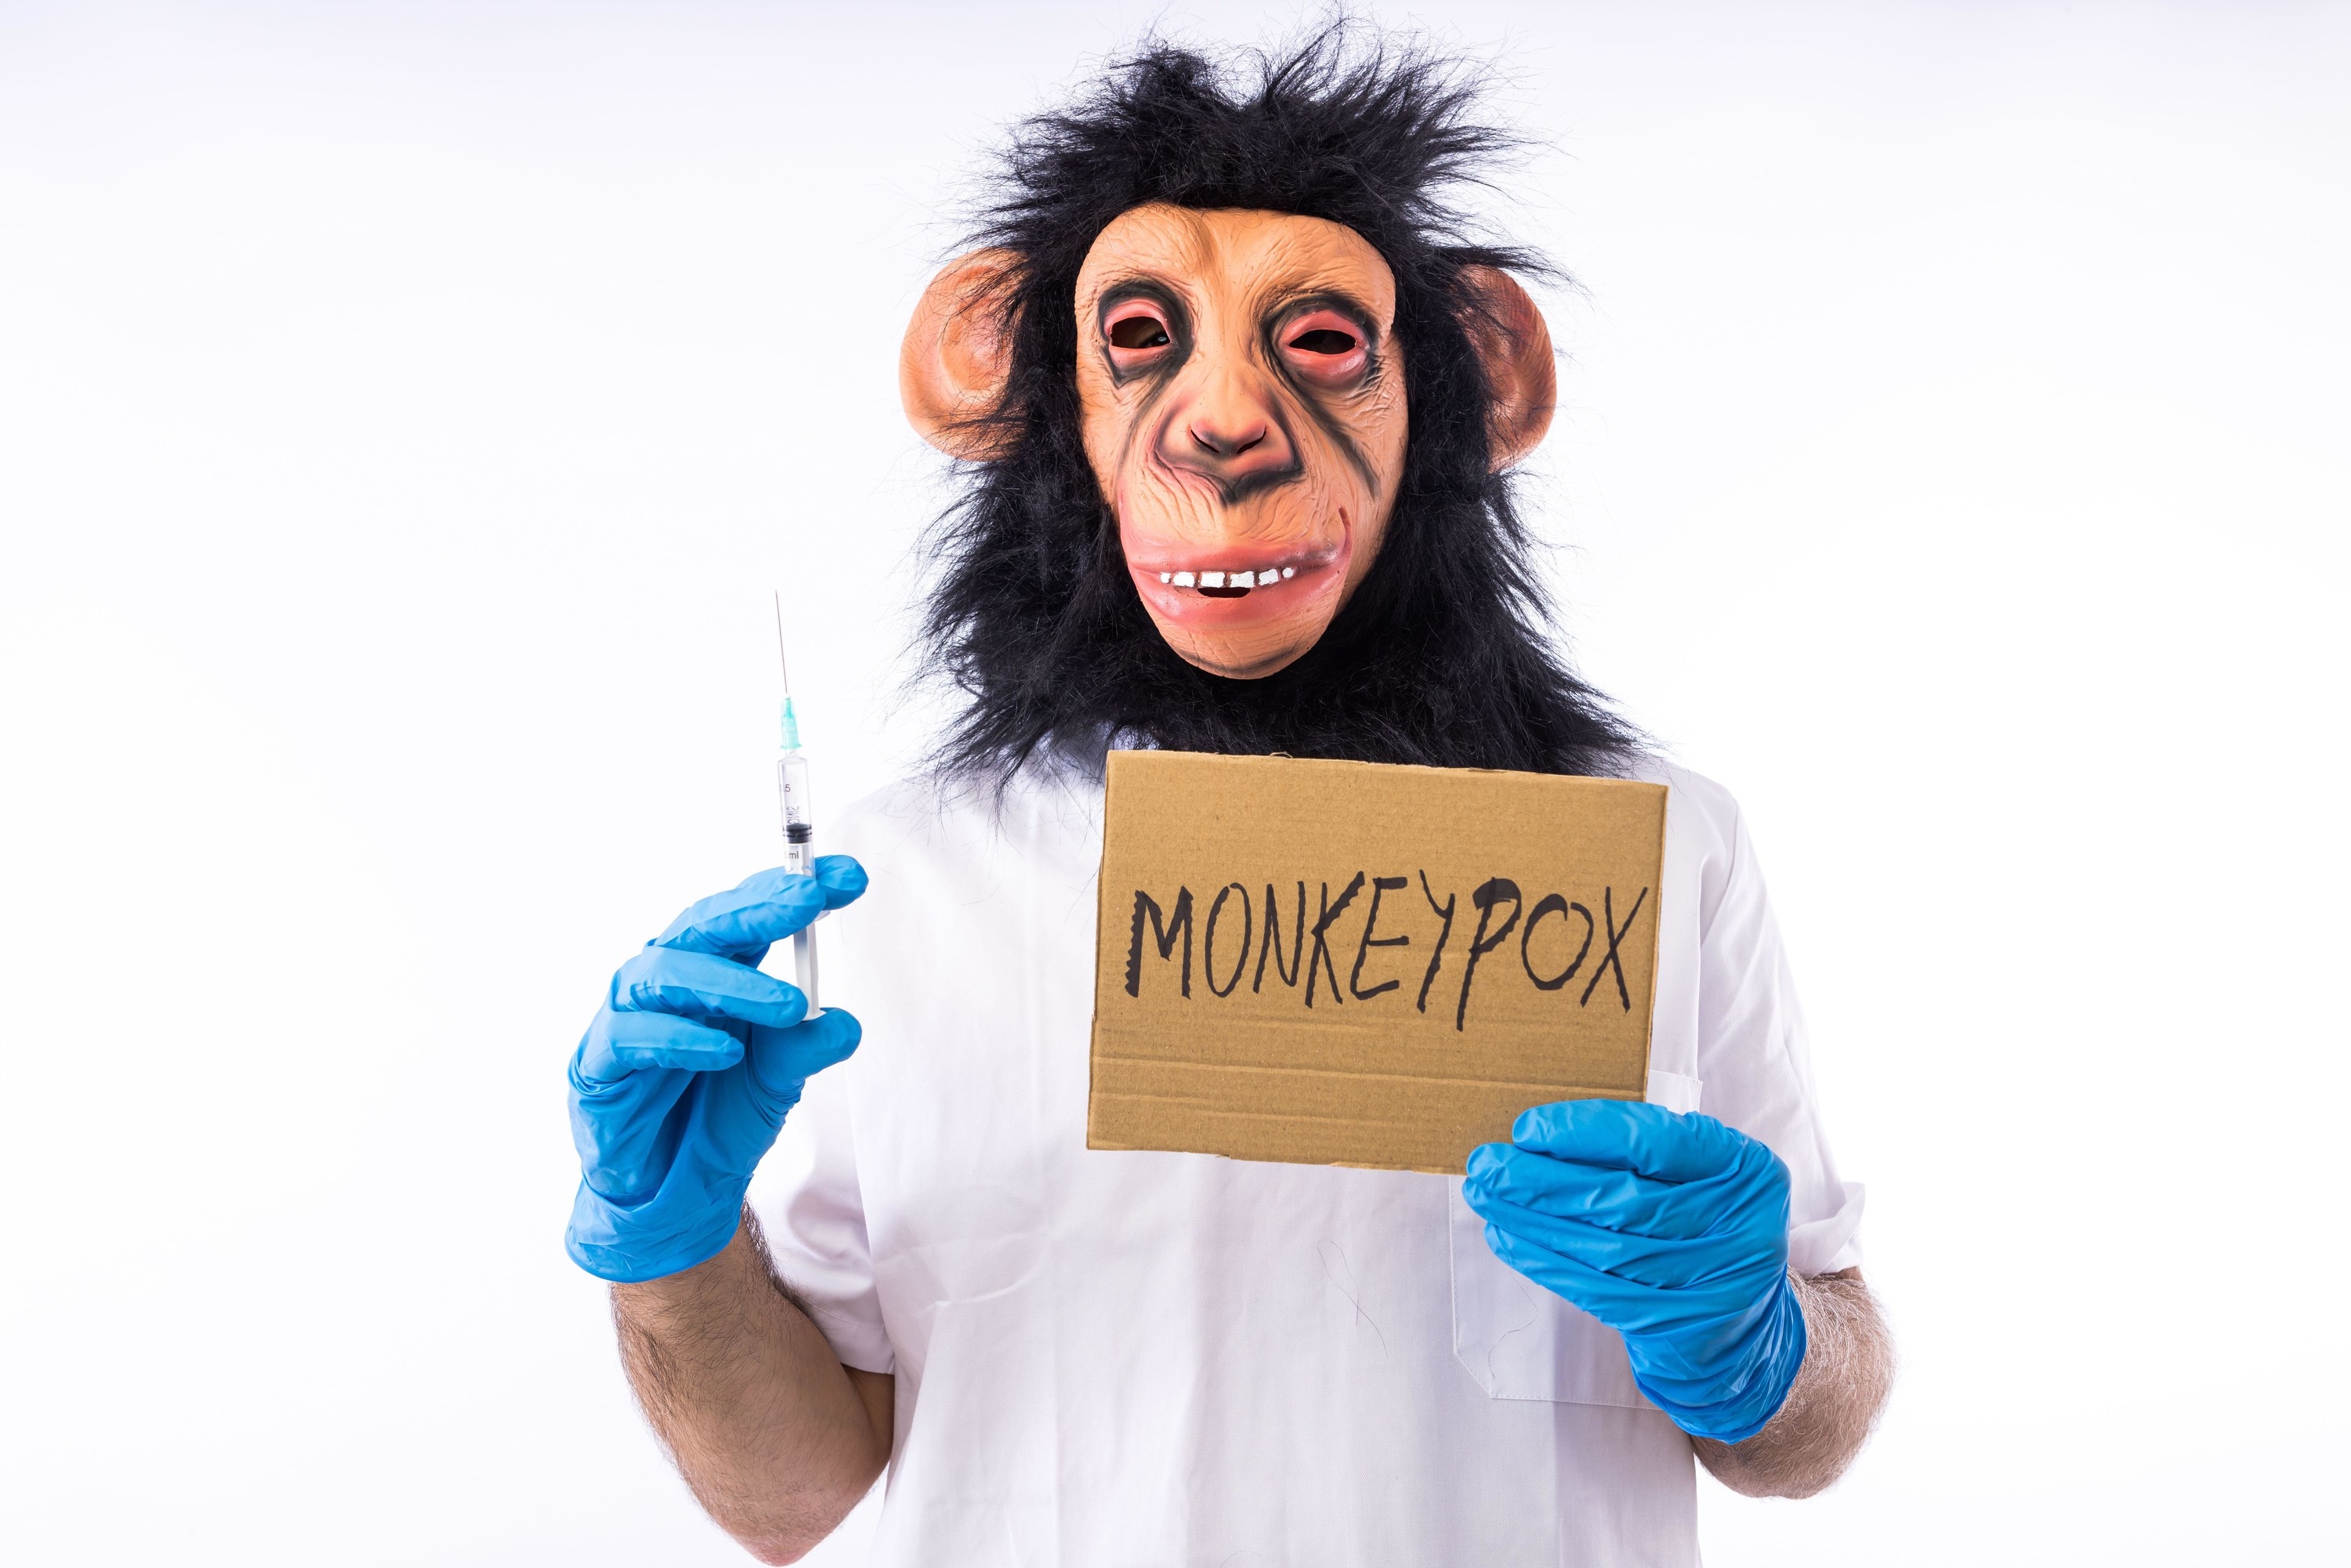 A man wearing a doctor&#x27;s coat and gloves, holding a syringe and a monkeypox sign while wearing a monkey mask